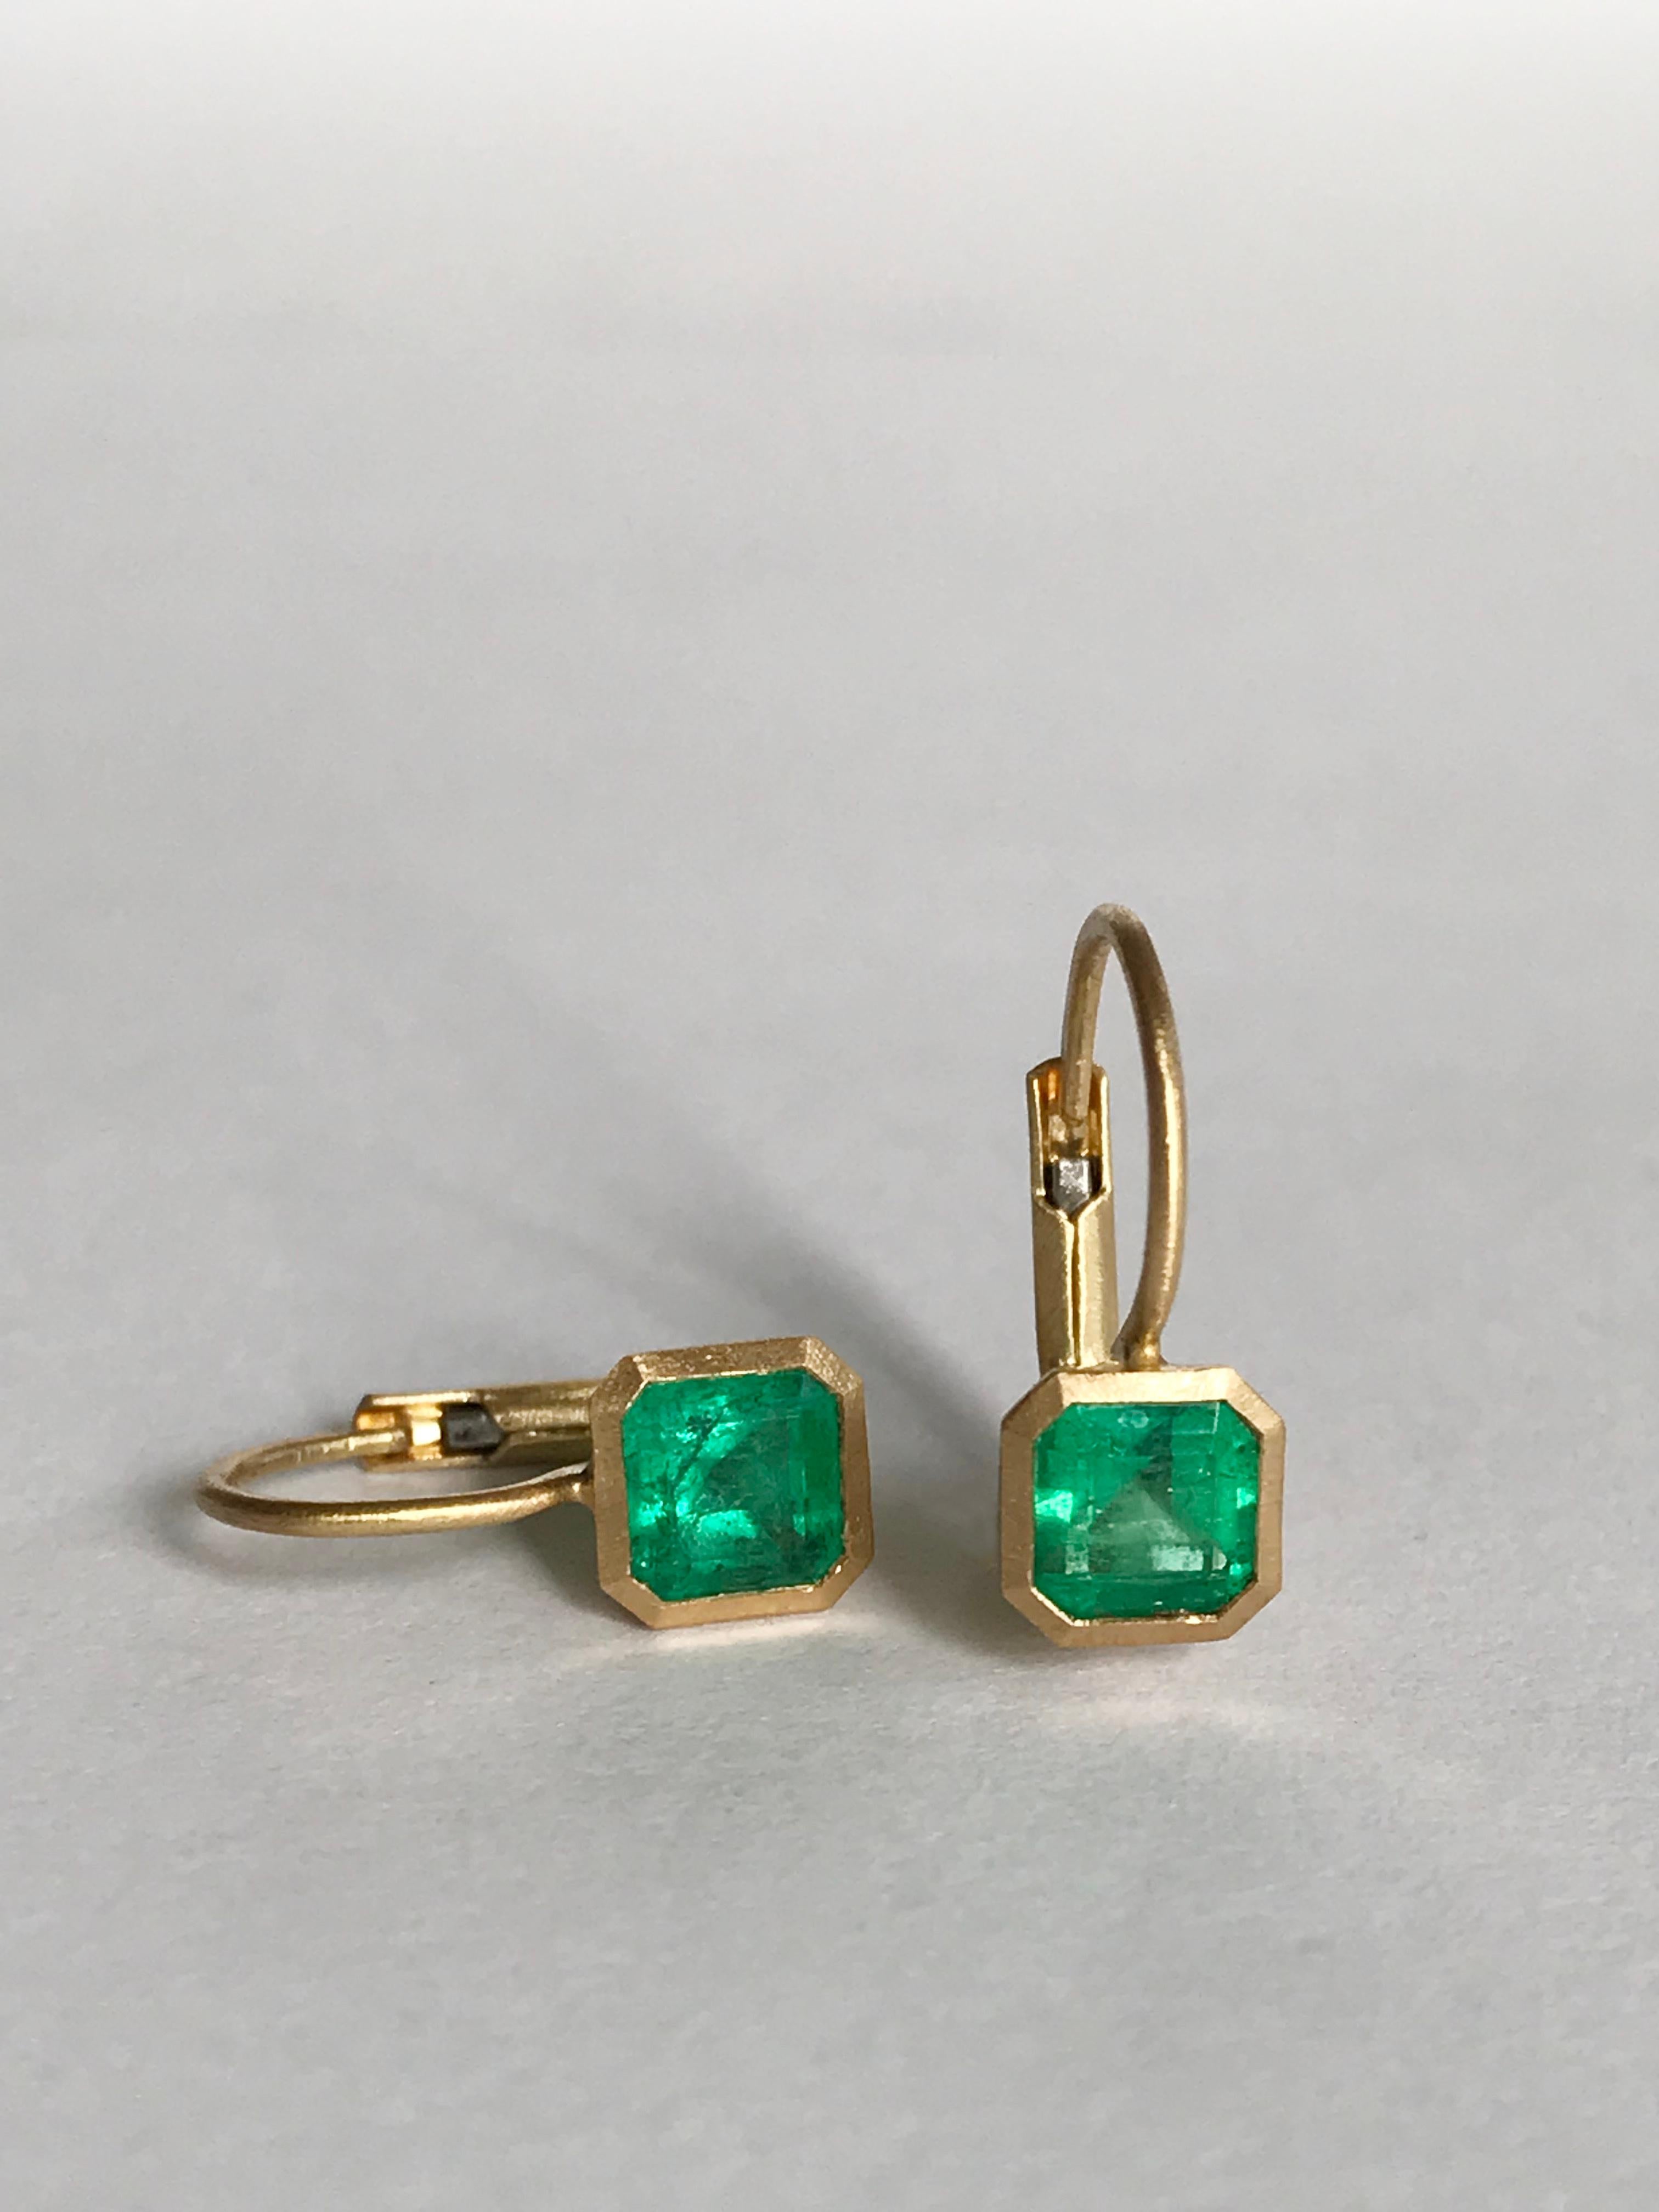 Dalben 0.91 Carat Colombian Emerald Yellow Gold Tiny Earrings For Sale 6